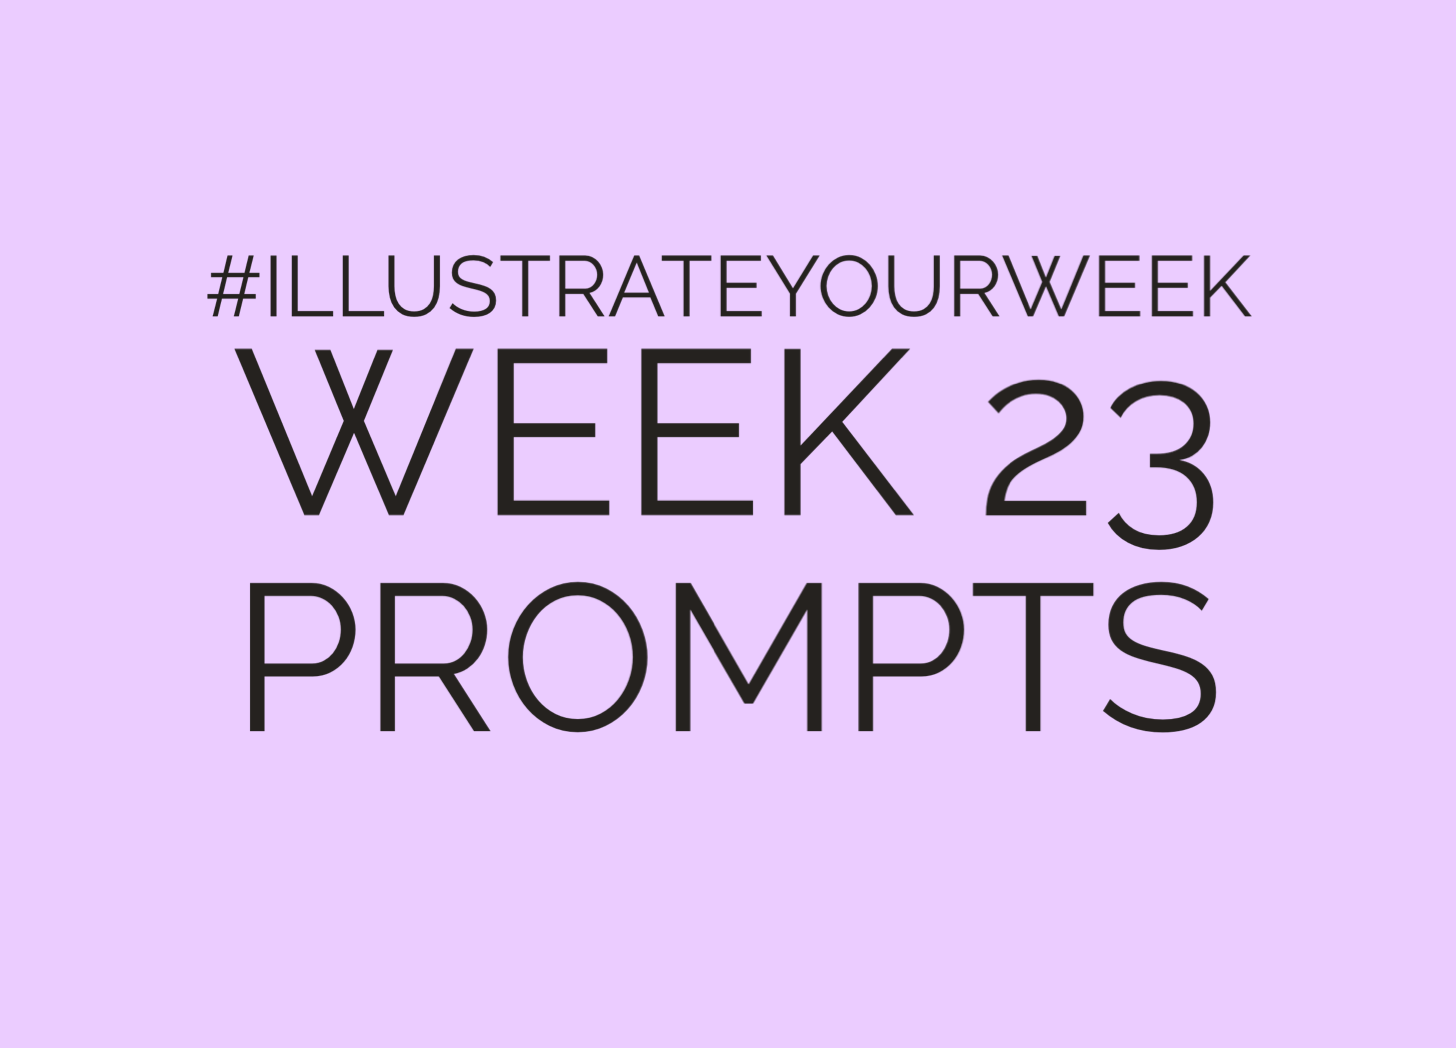 Week 23 Prompts for Illustrate Your Week headline only